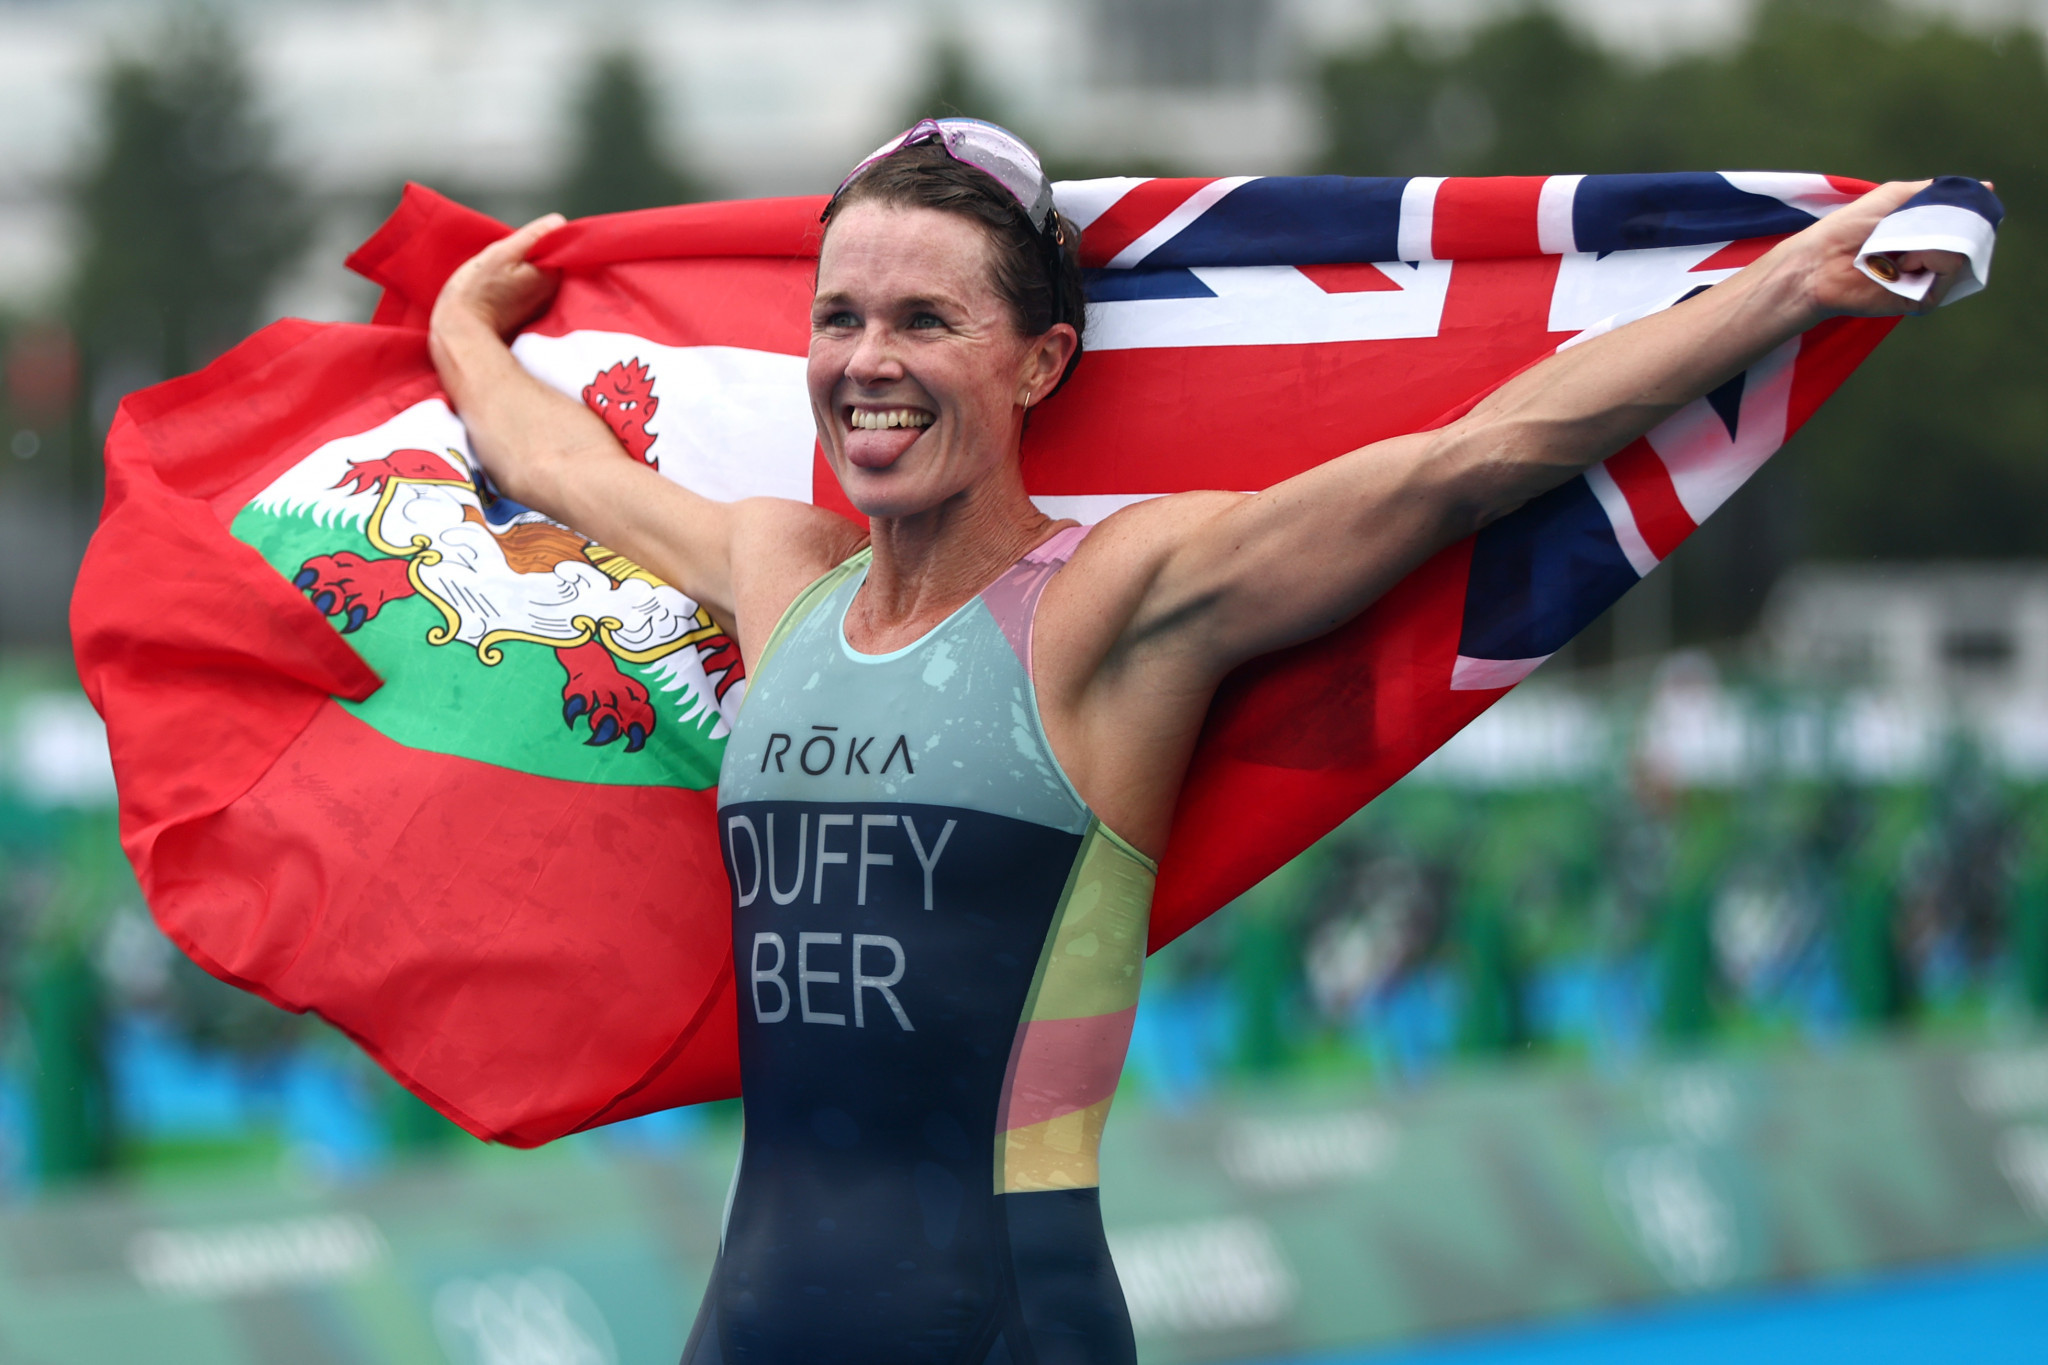 Bermuda’s Flora Duffy won the first gold medal of the day, in the women's triathlon, and that is the nation's first-ever Olympic title ©Getty Images